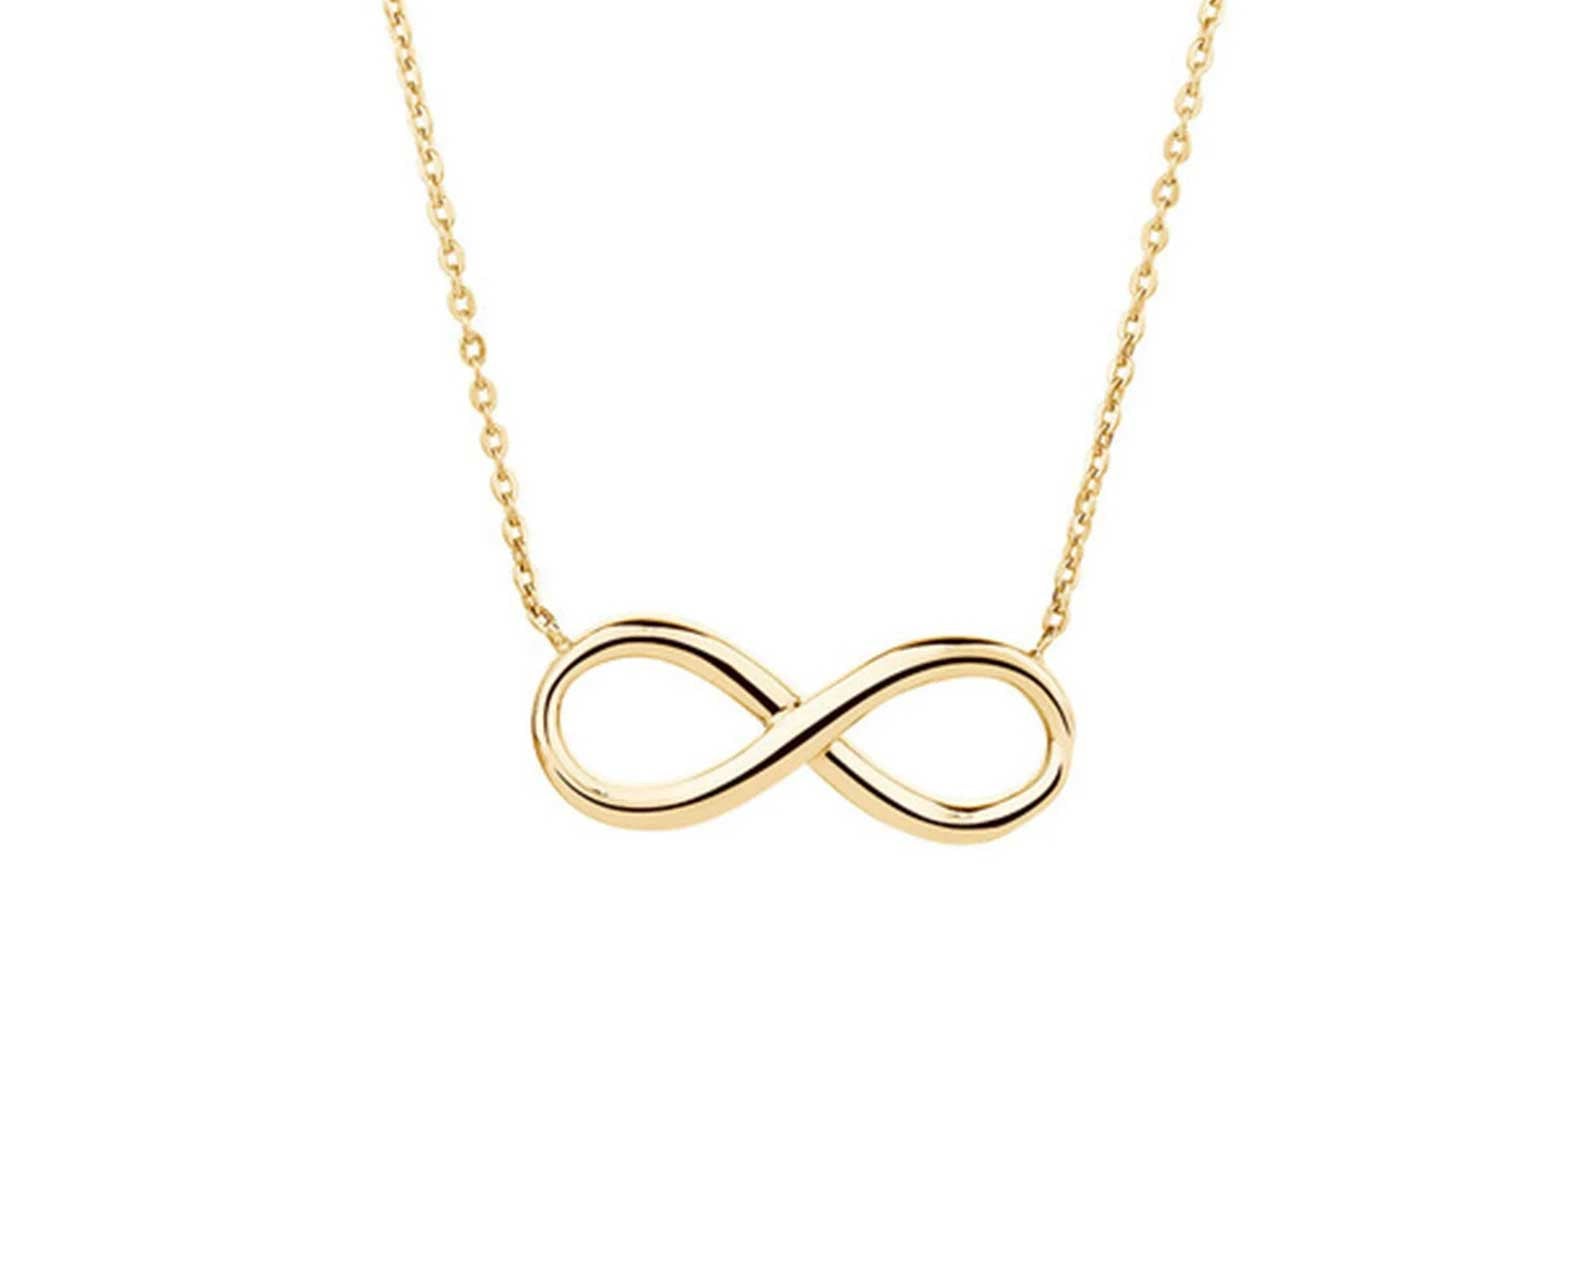 18 Carat Gold Infinity Necklace - A symbol of timeless union, capturing the enduring connections and infinite elegance inspired by Arabian jewelry in the heart of the UAE.